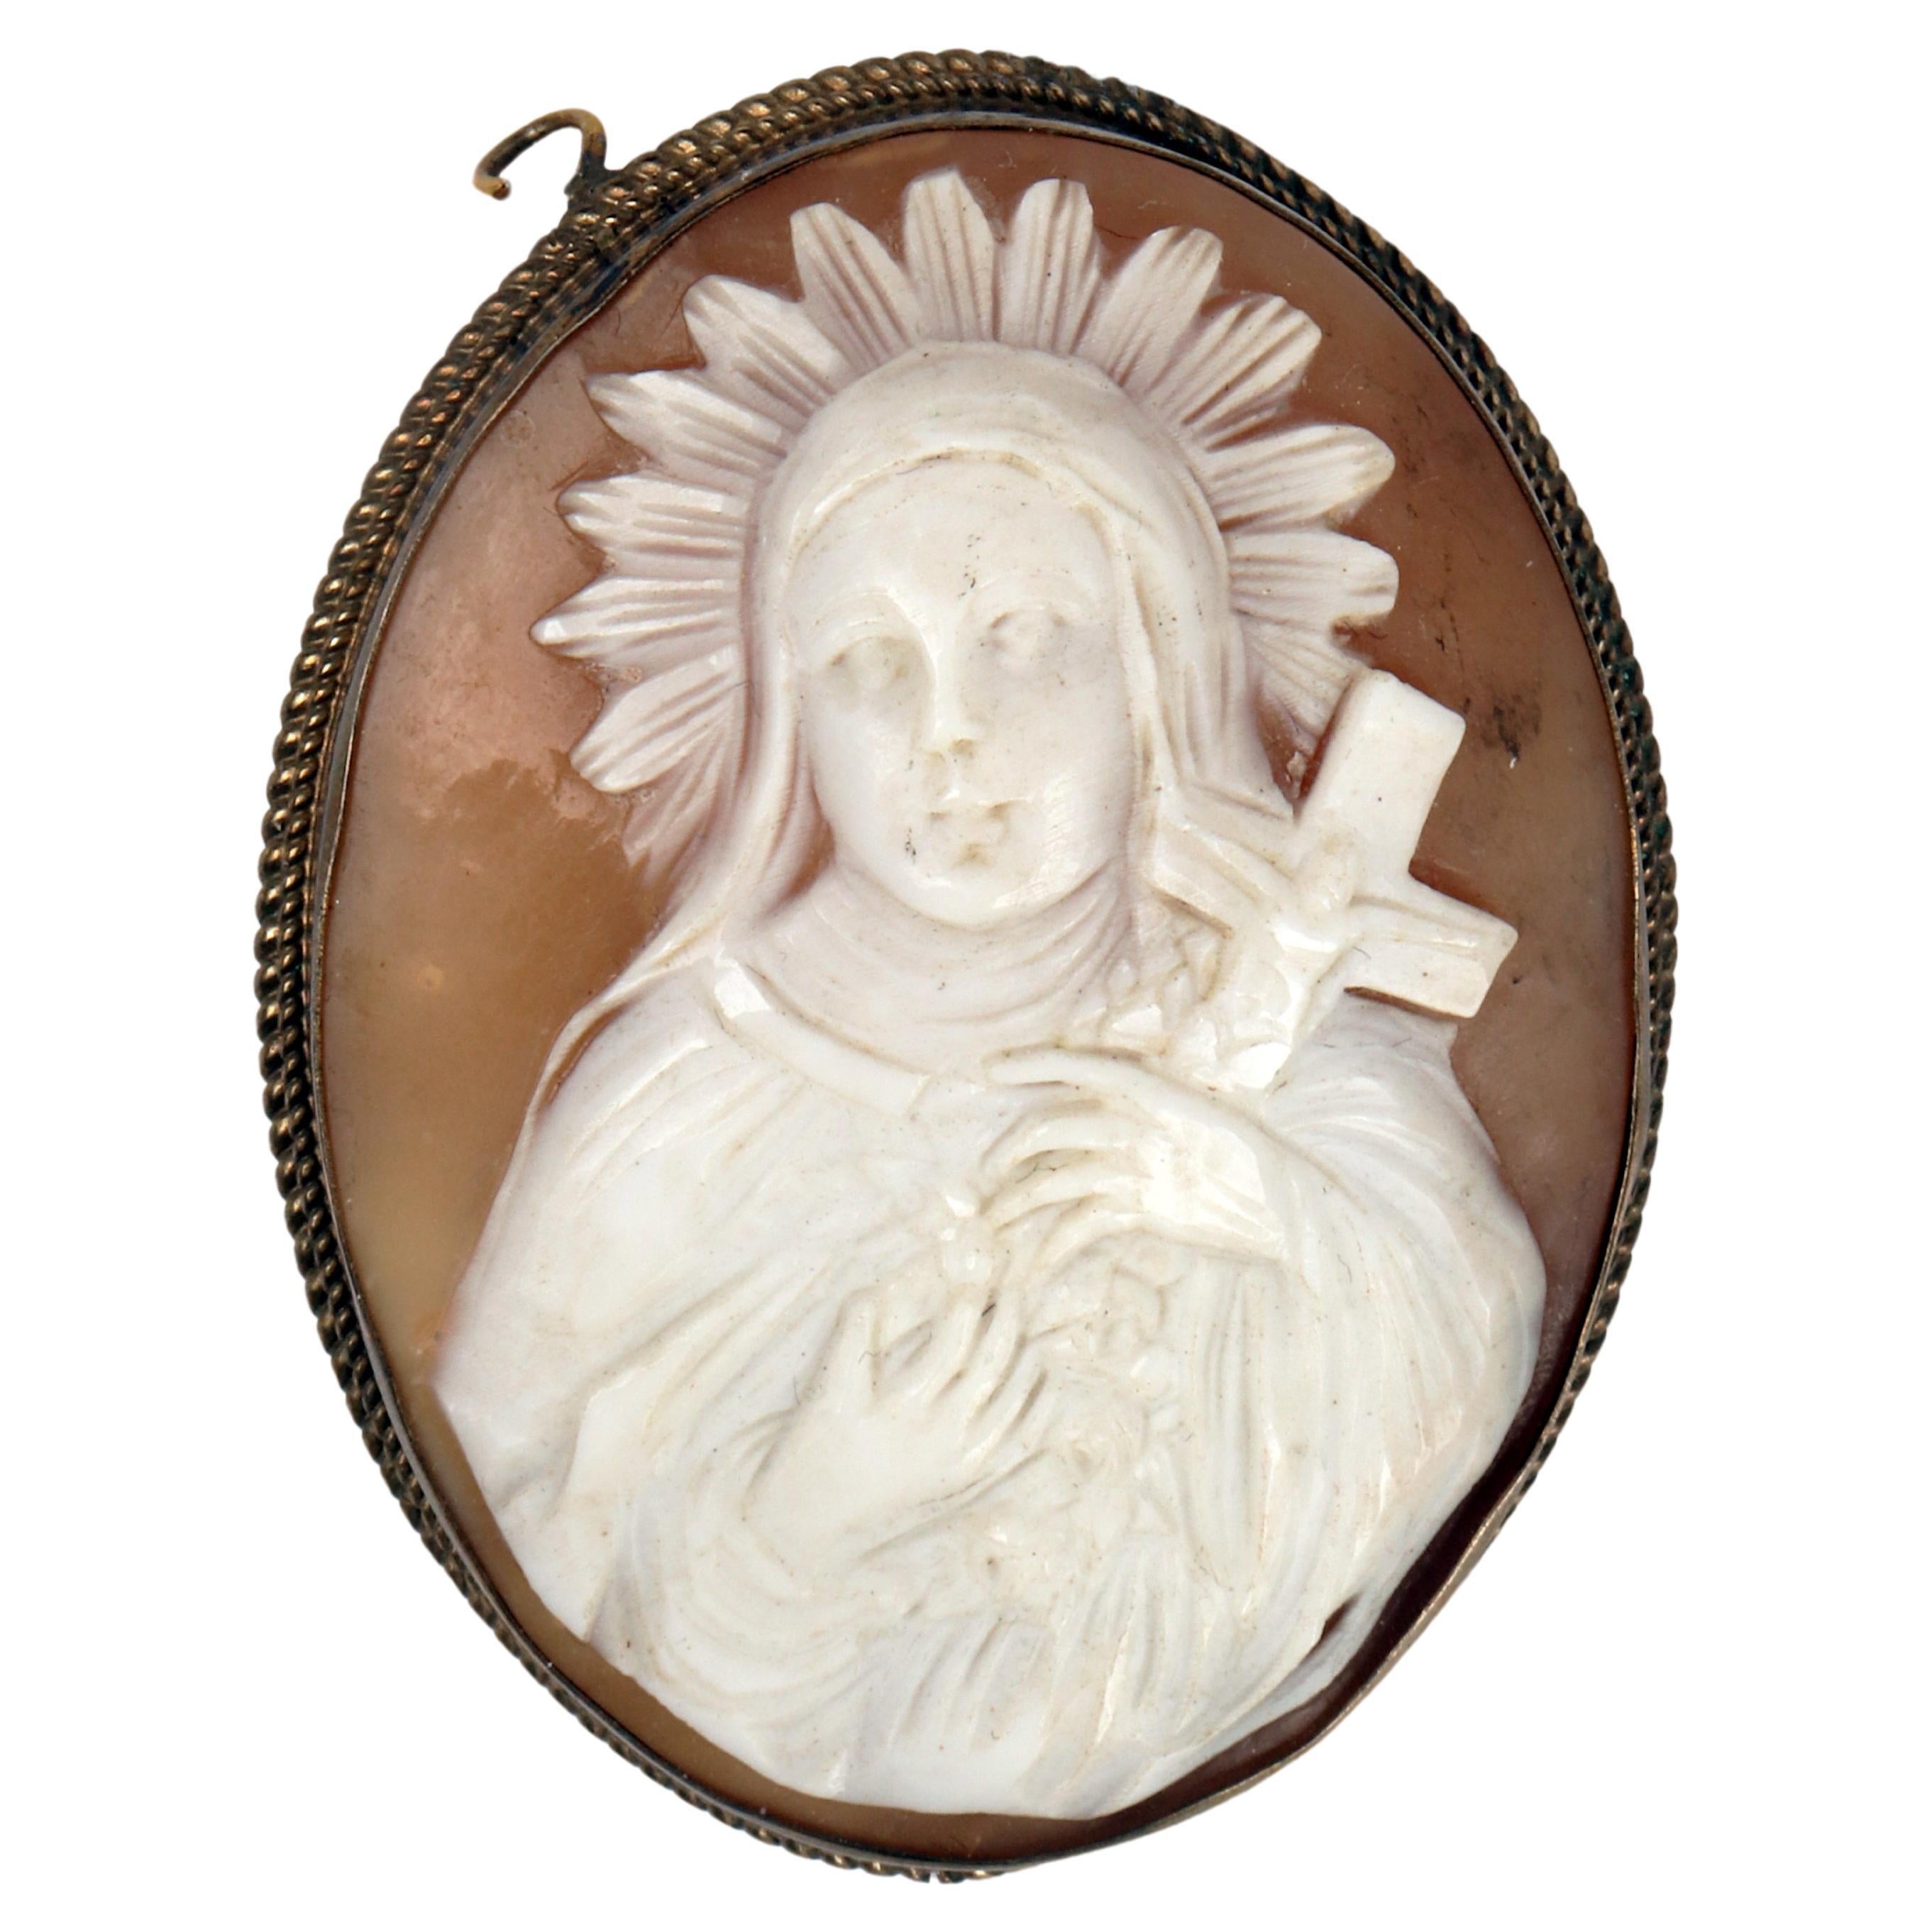 A shell cameo mounted in gilt metal with a Santa figure, England 1880. For Sale